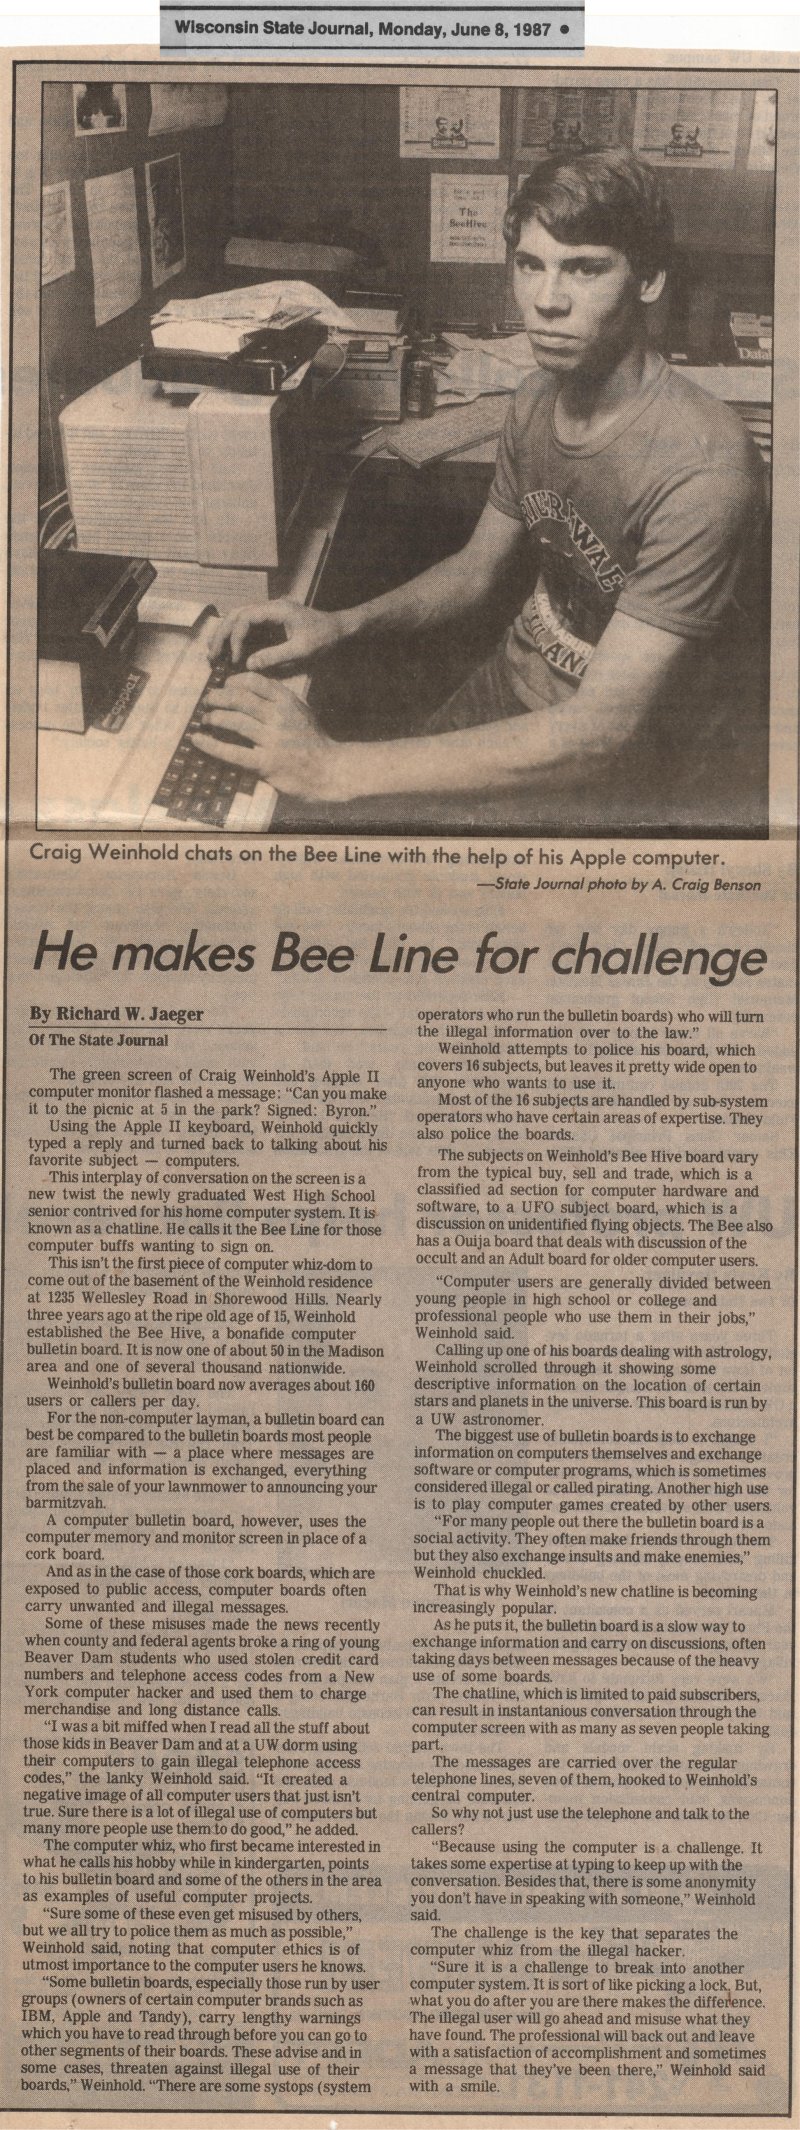 He makes Bee Line for challenge (small).jpg